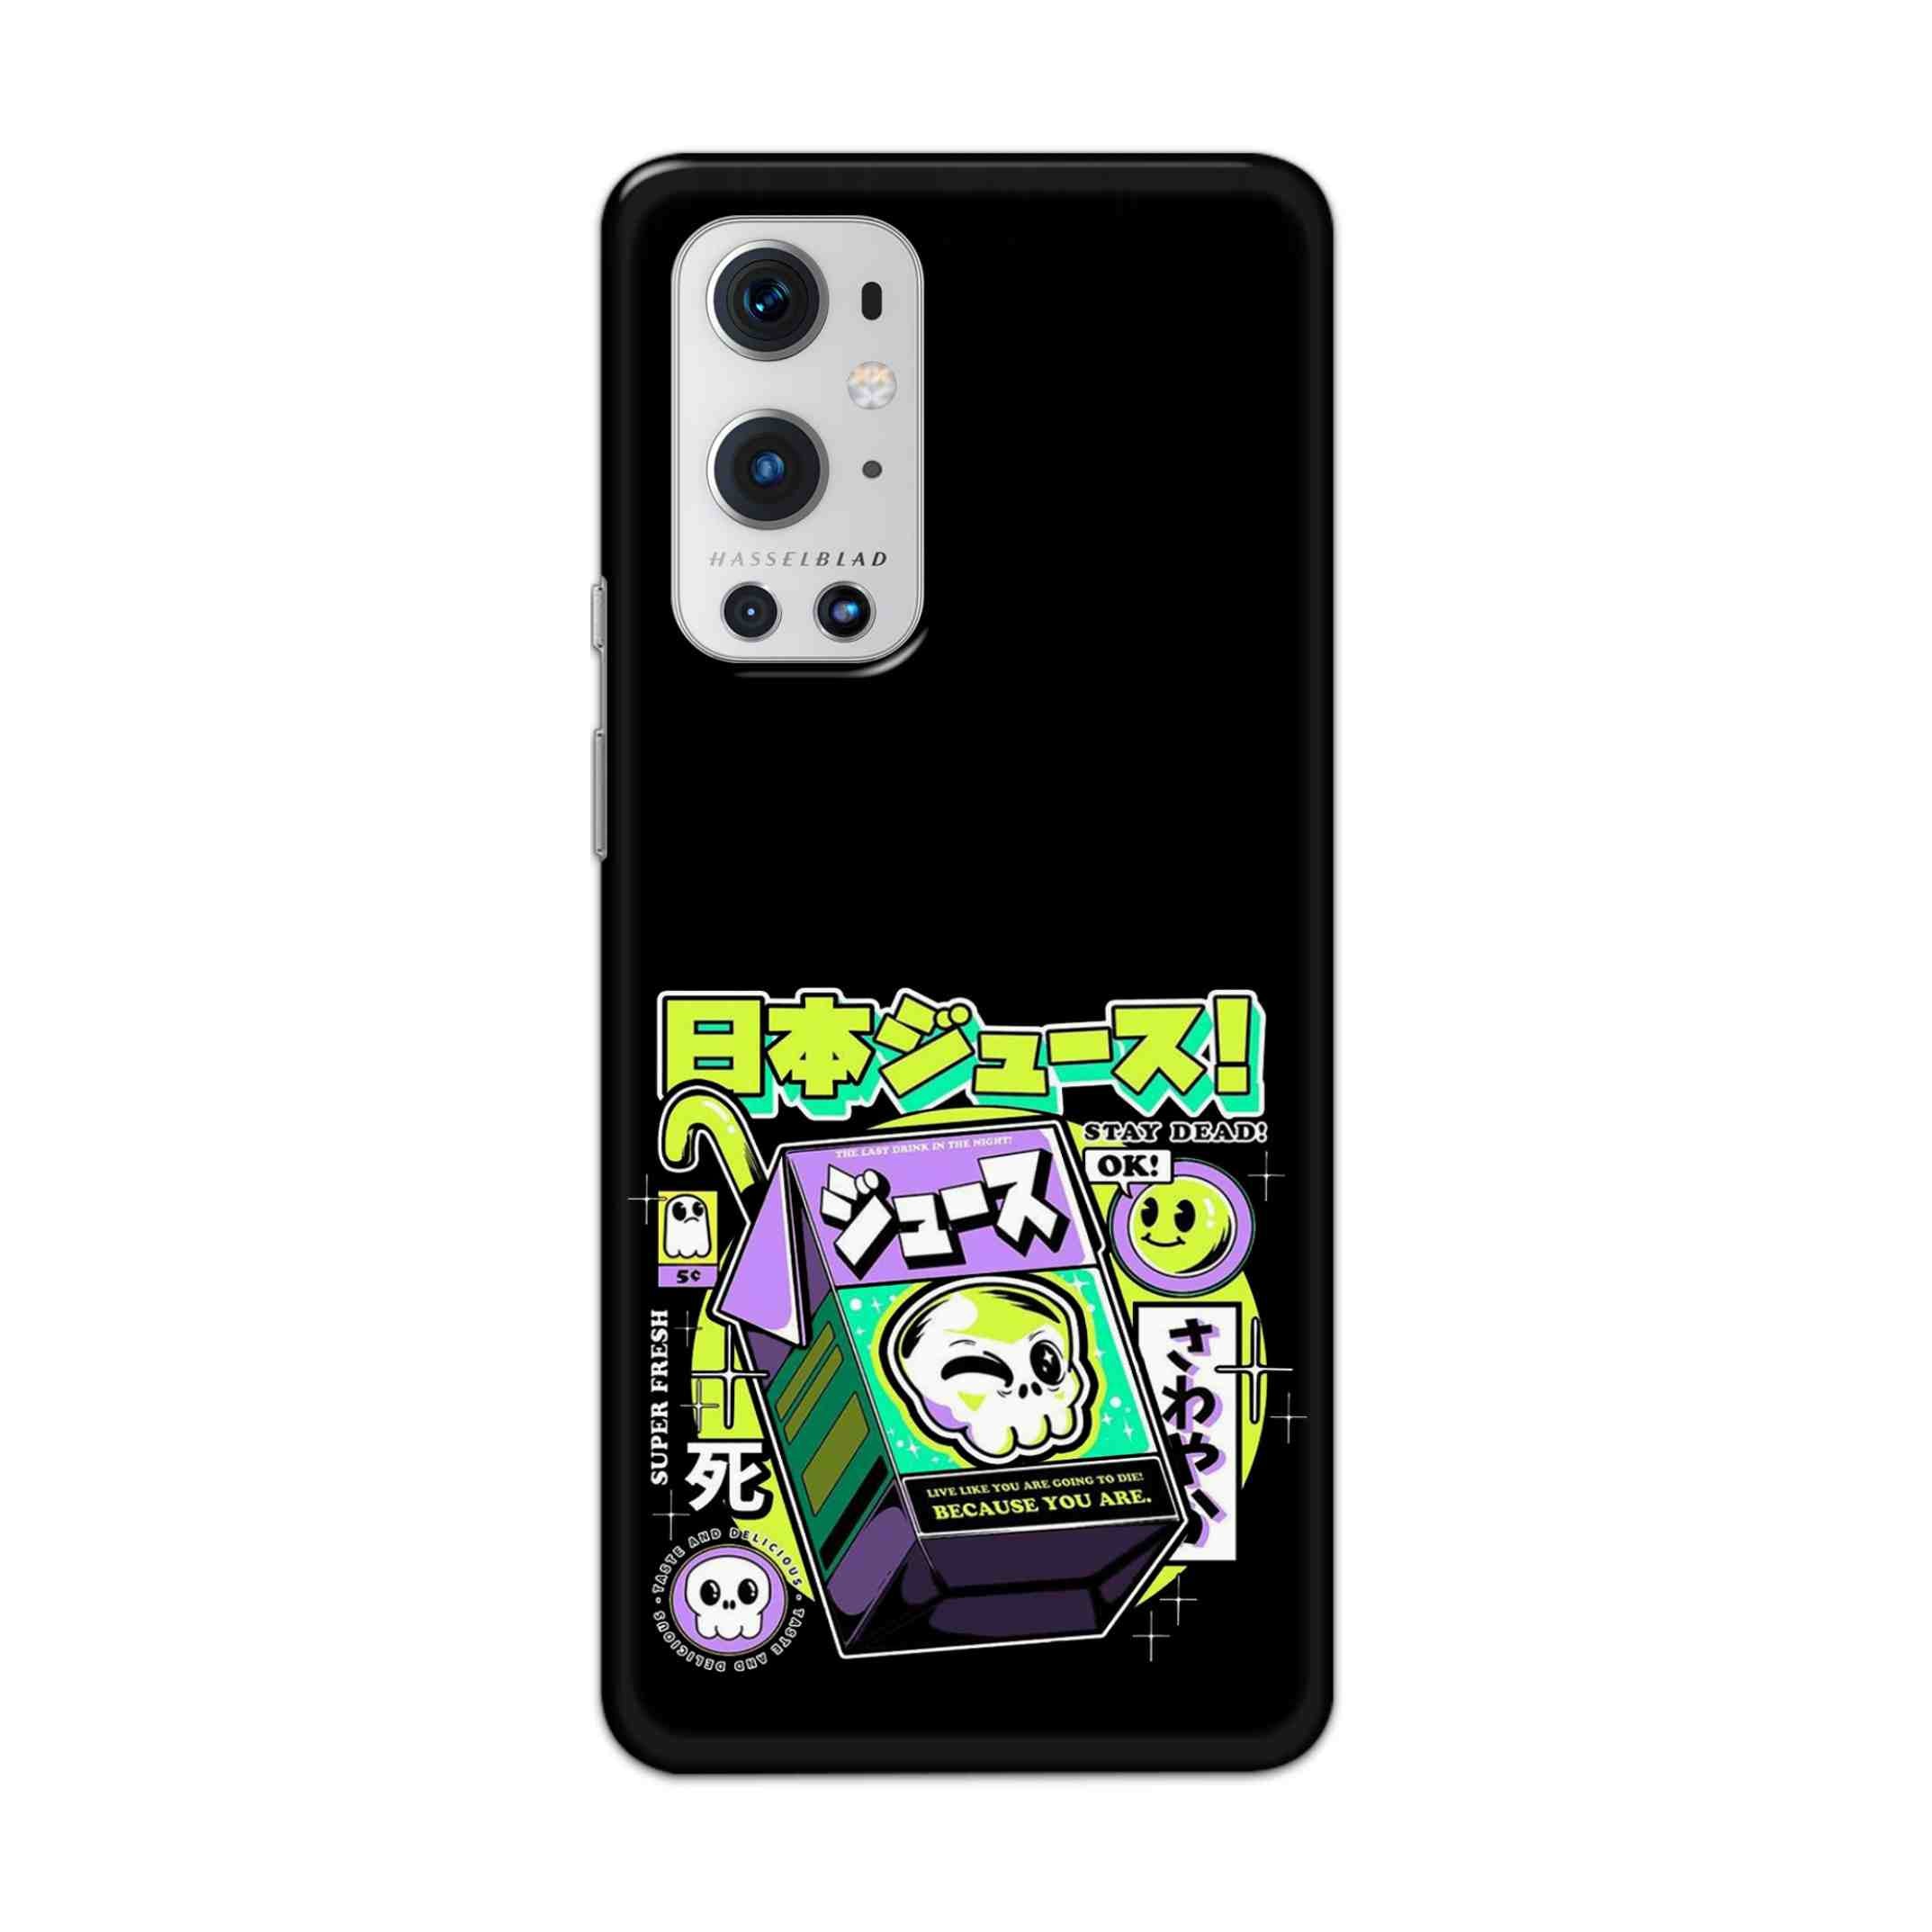 Buy Because You Are Hard Back Mobile Phone Case Cover For OnePlus 9 Pro Online